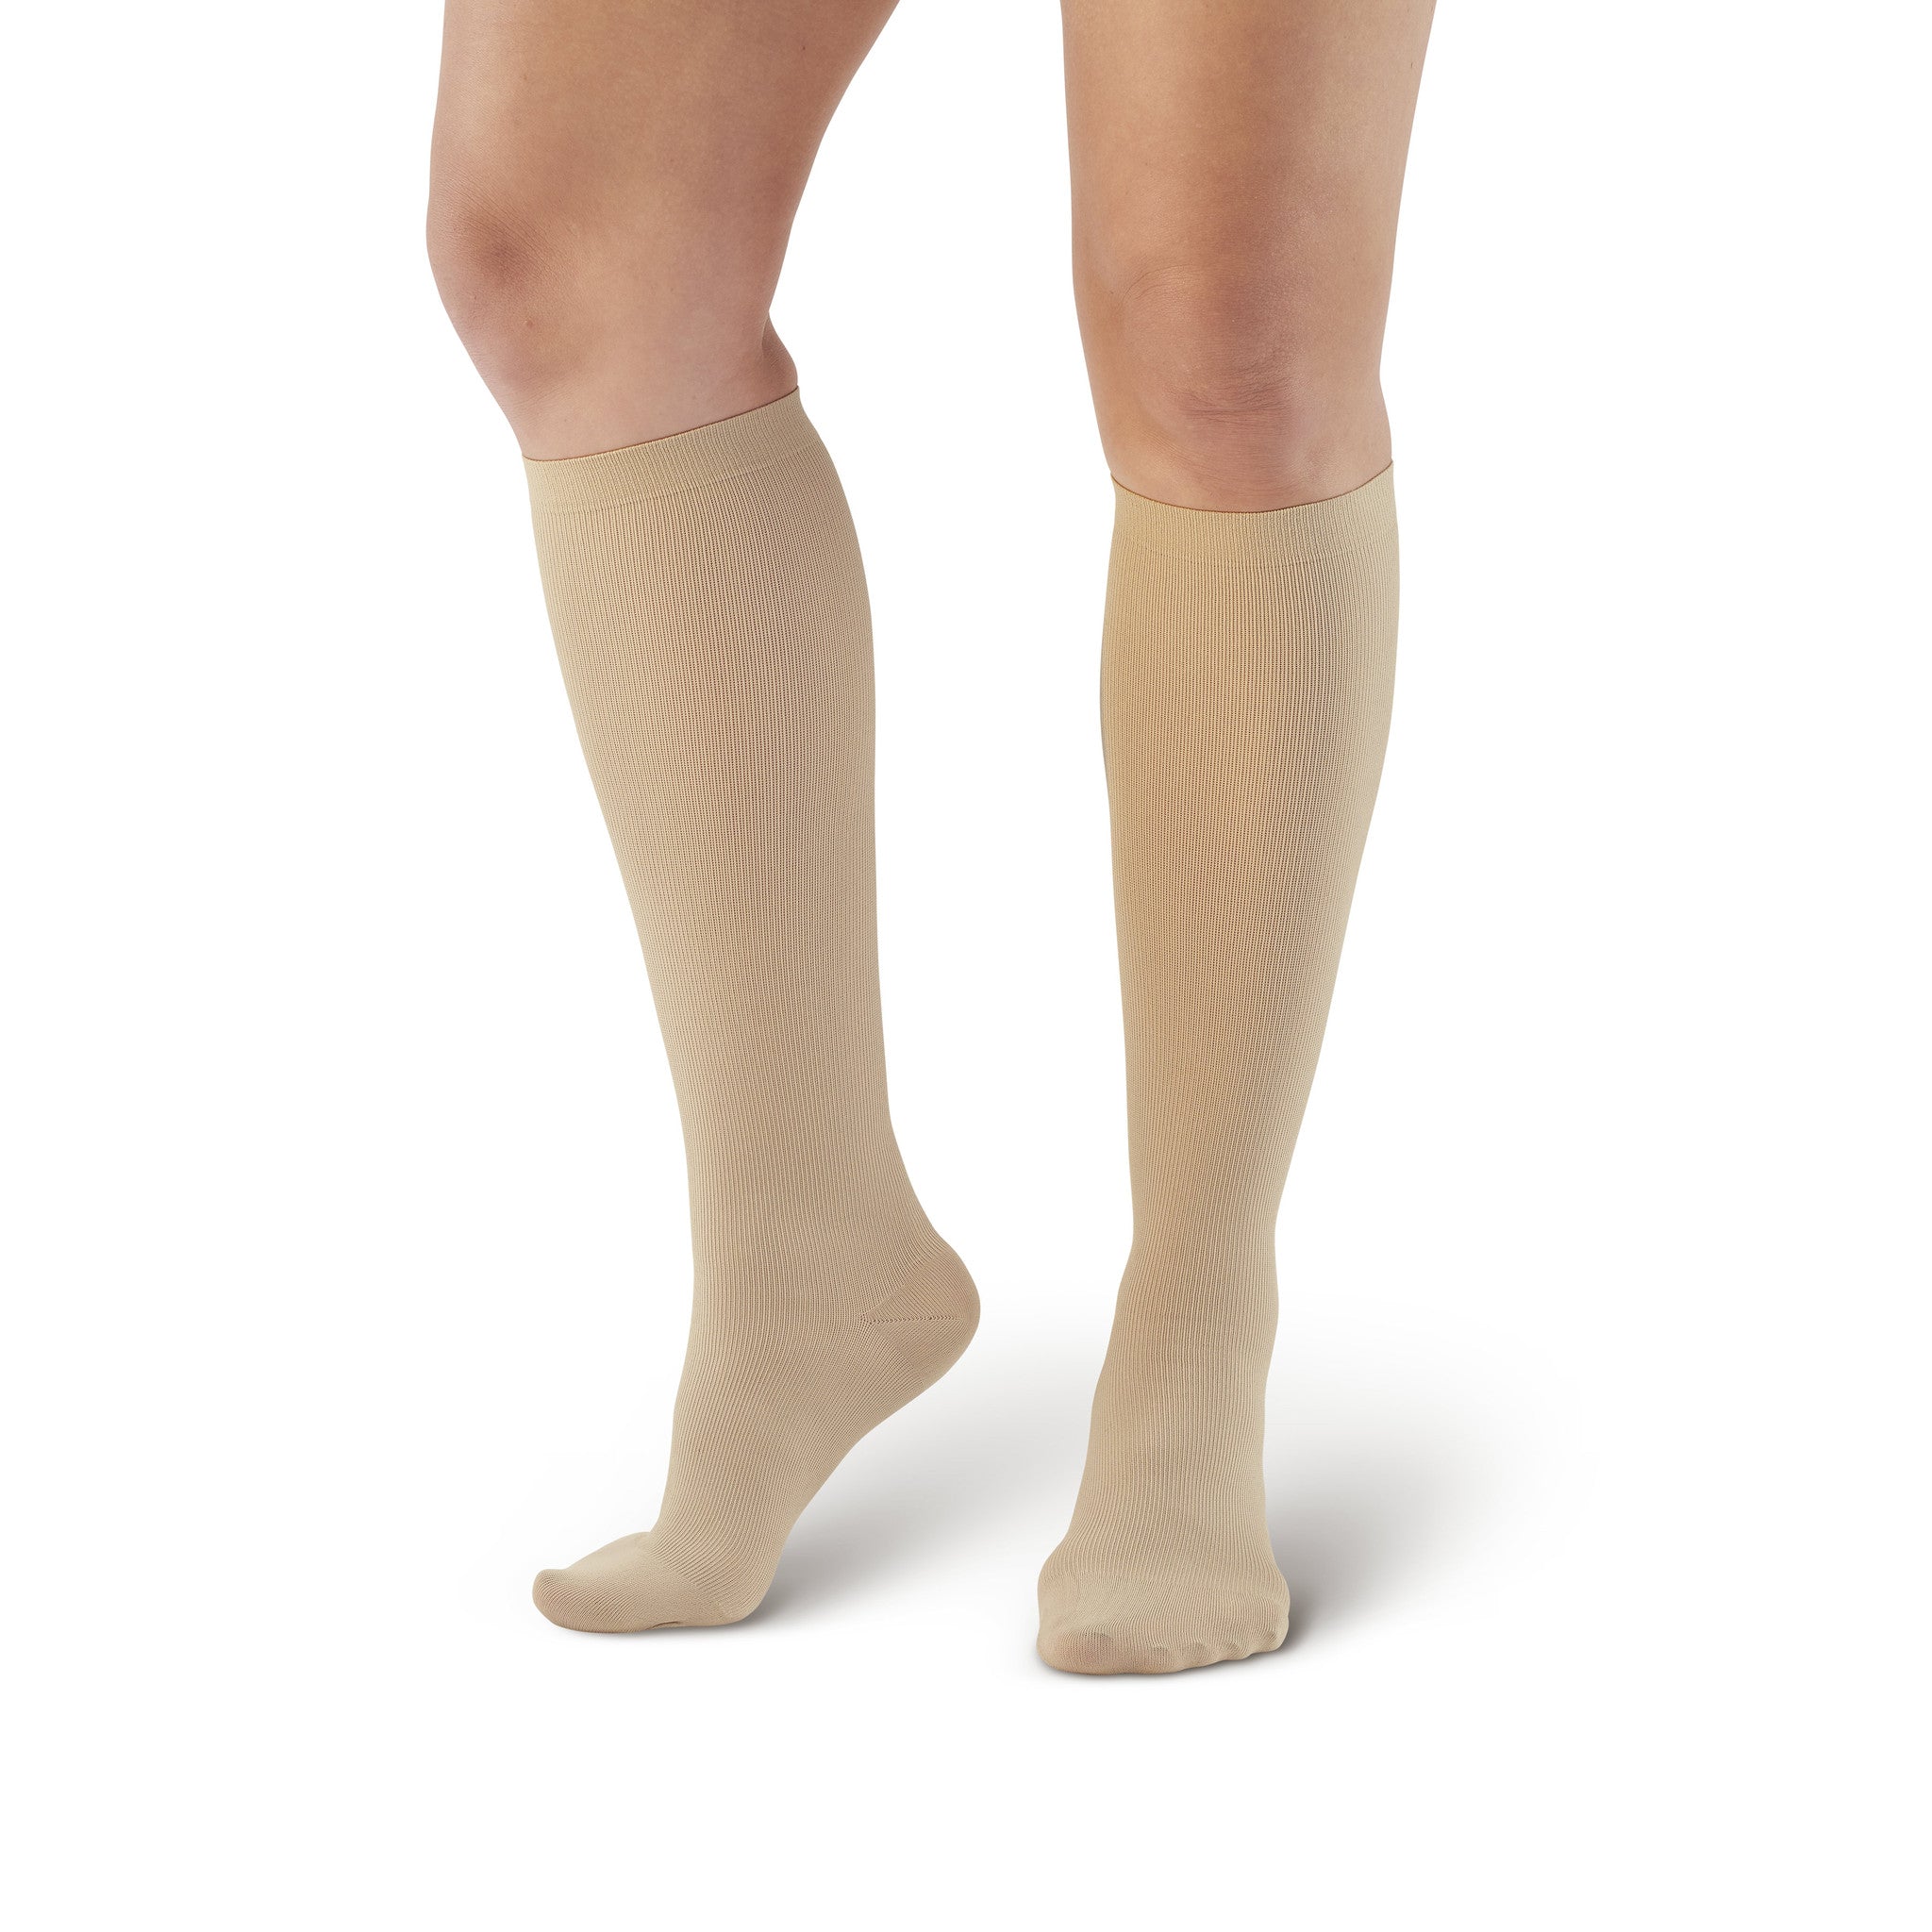 Maternity Compression Leggings For Varicose Veins